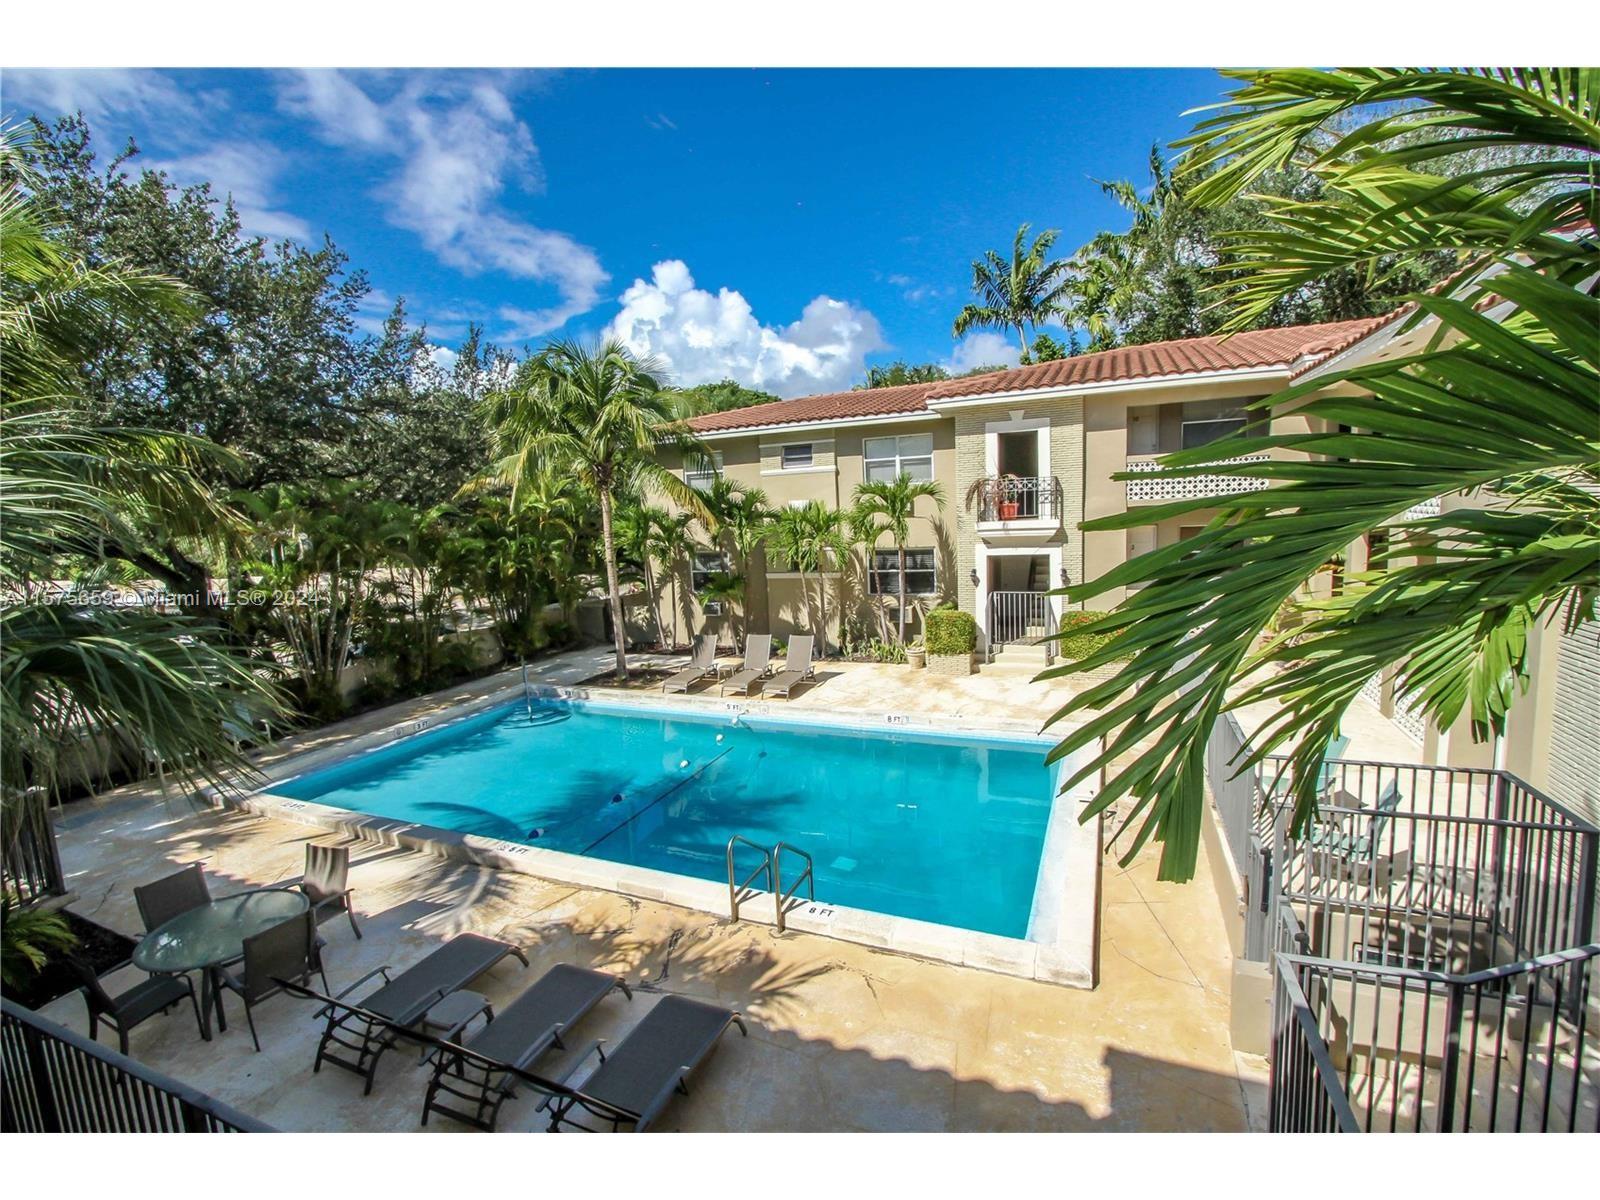 View Coral Gables, FL 33133 multi-family property